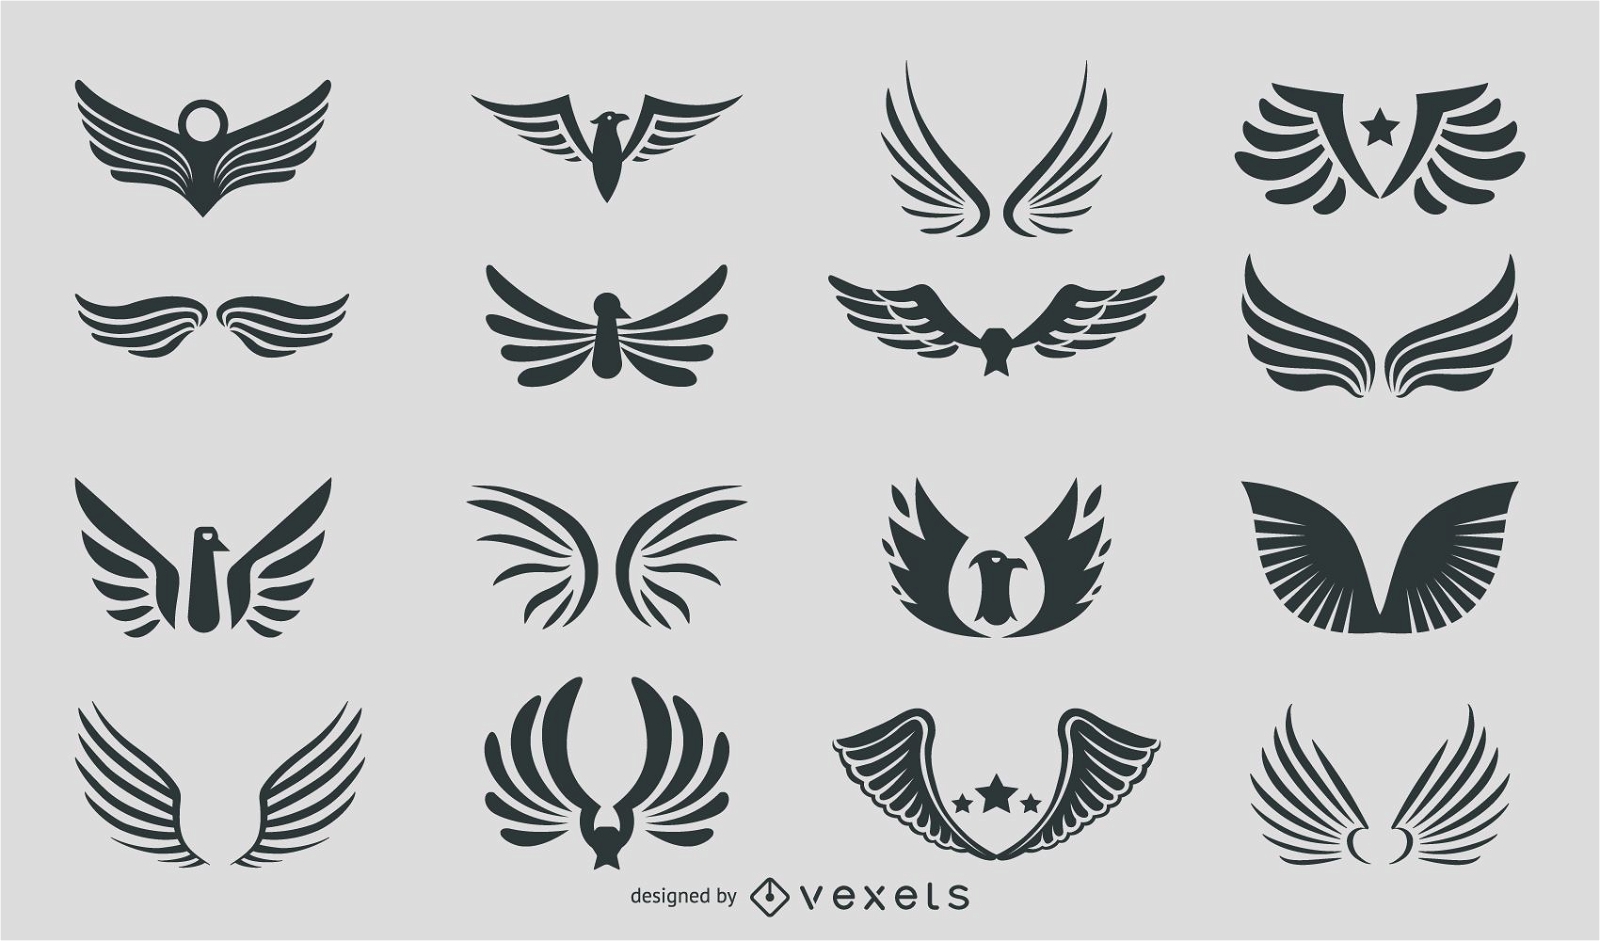 Silhouette Abstract Eagles & Wings Pack